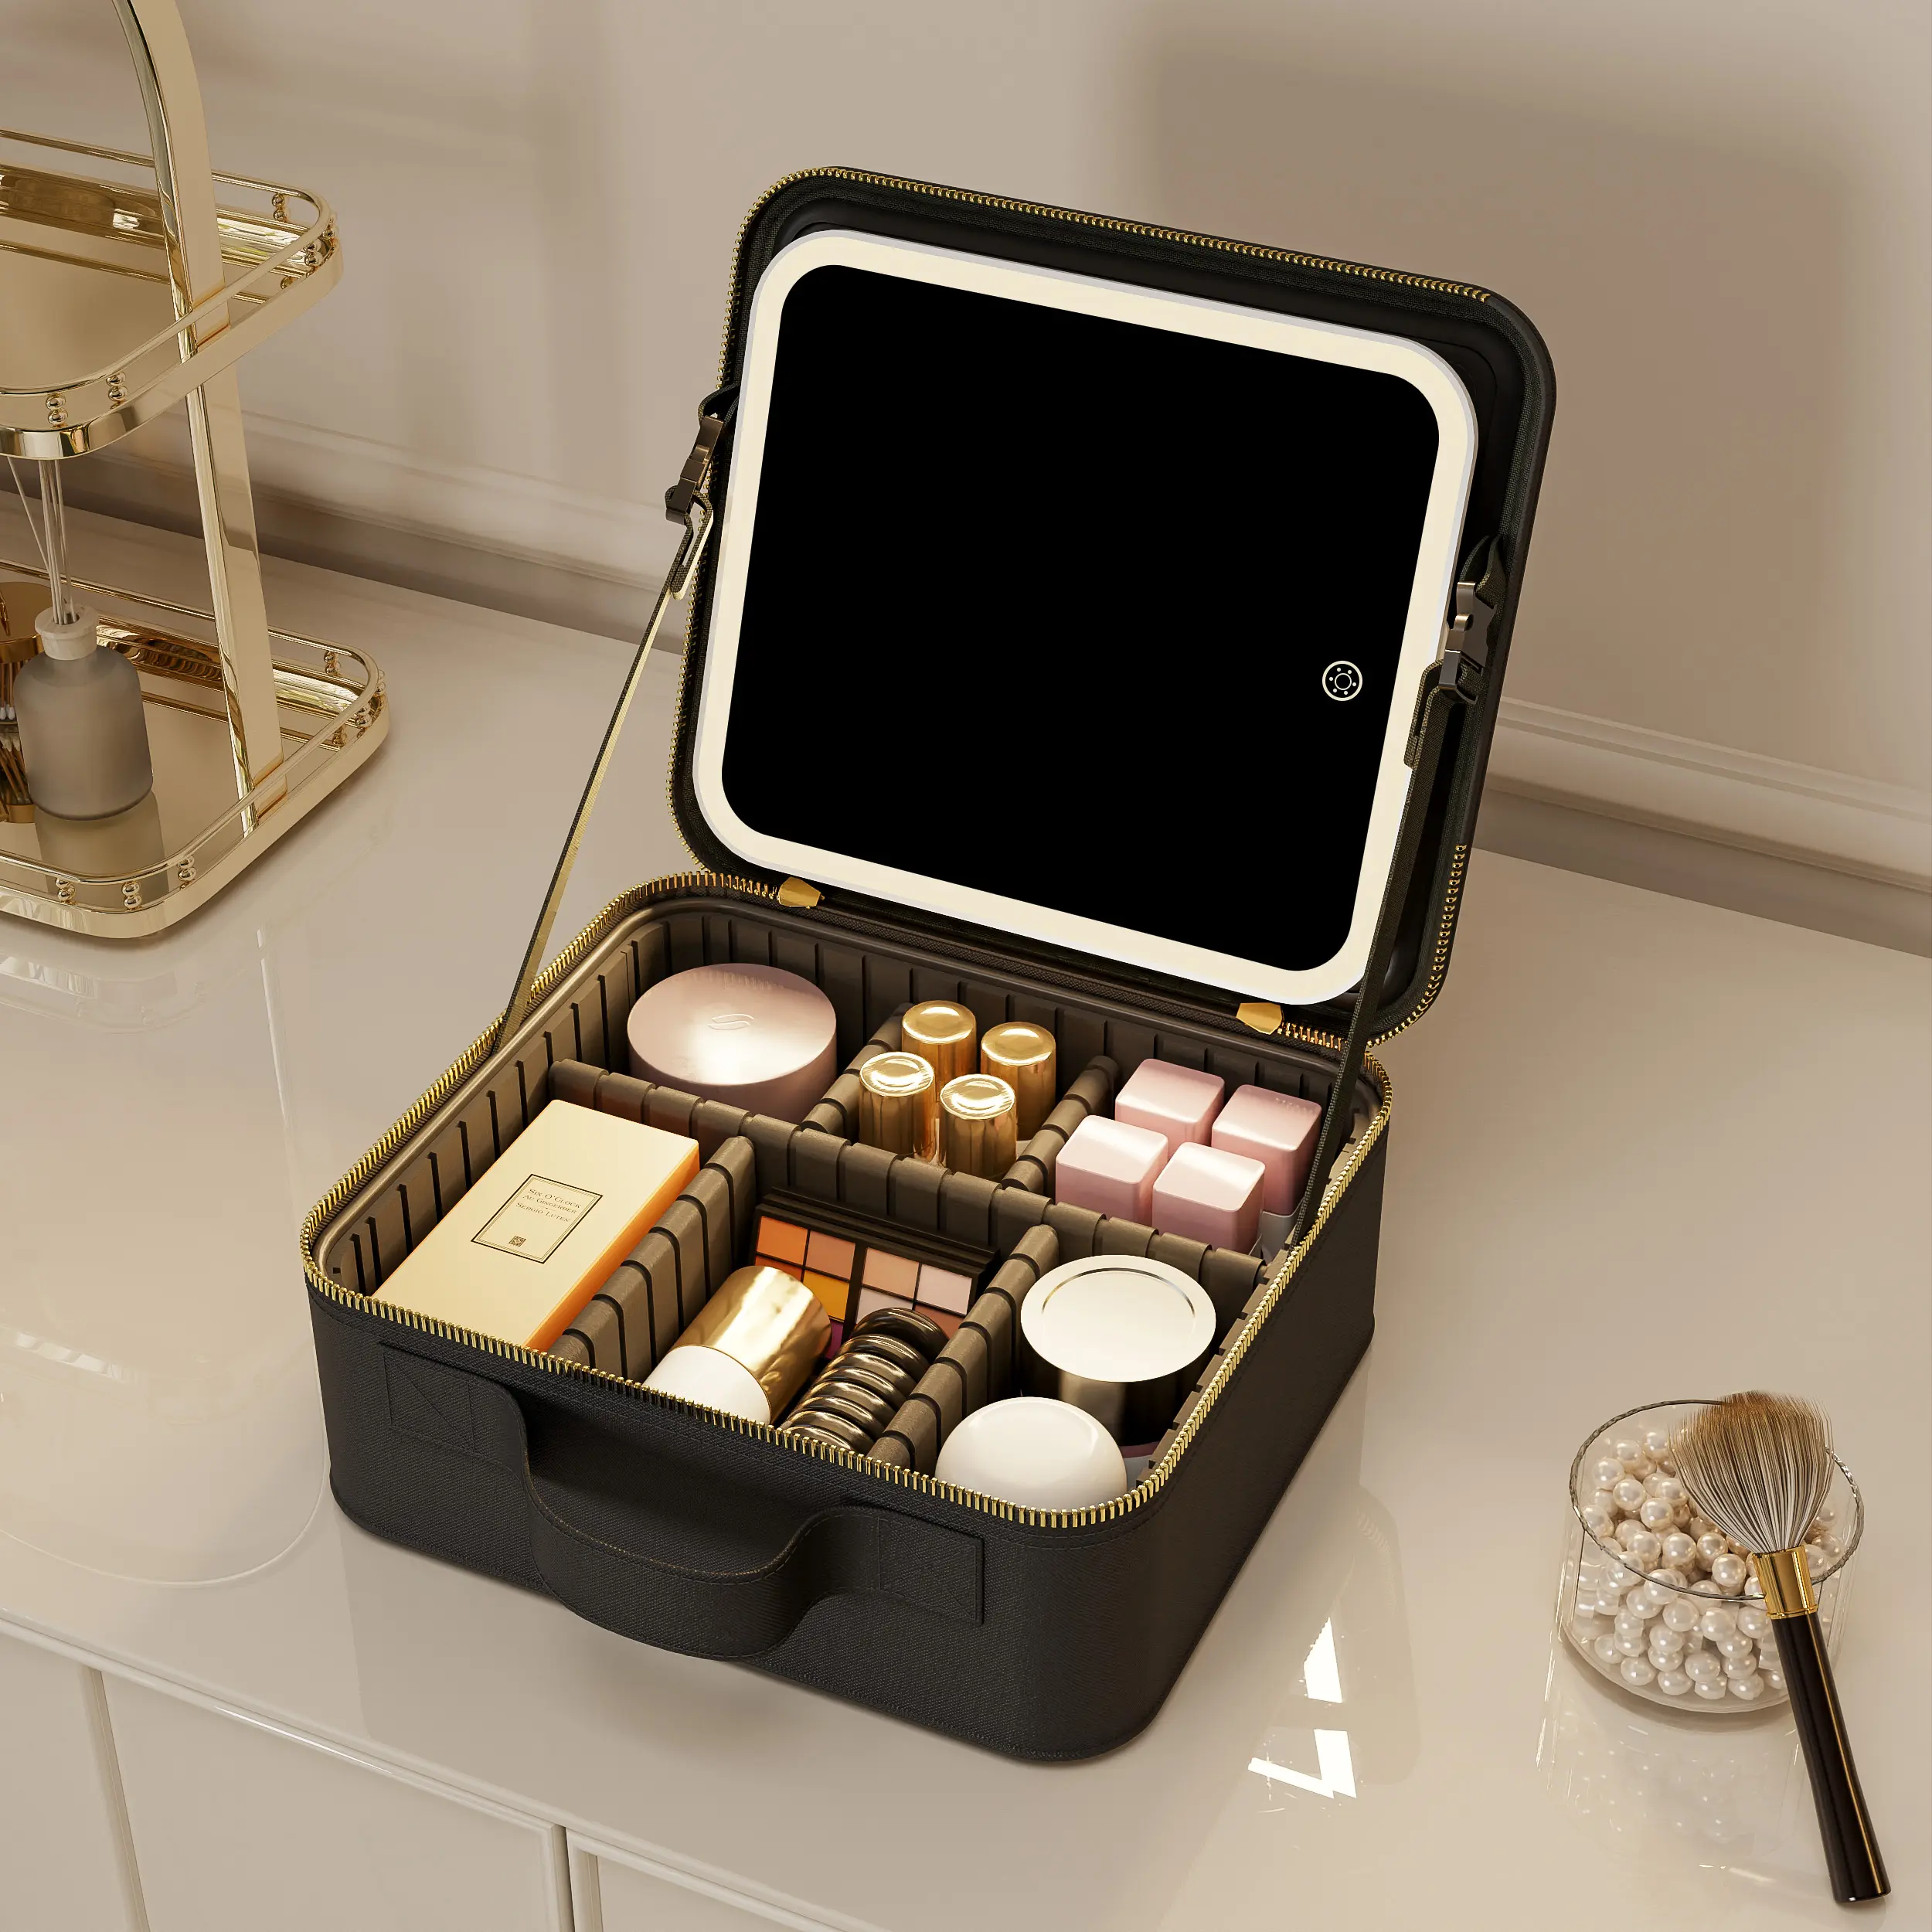 Portable Beauty Light Up Travel Storage Lighted Box Vanity Makeup Bag Case With Led Light Mirror